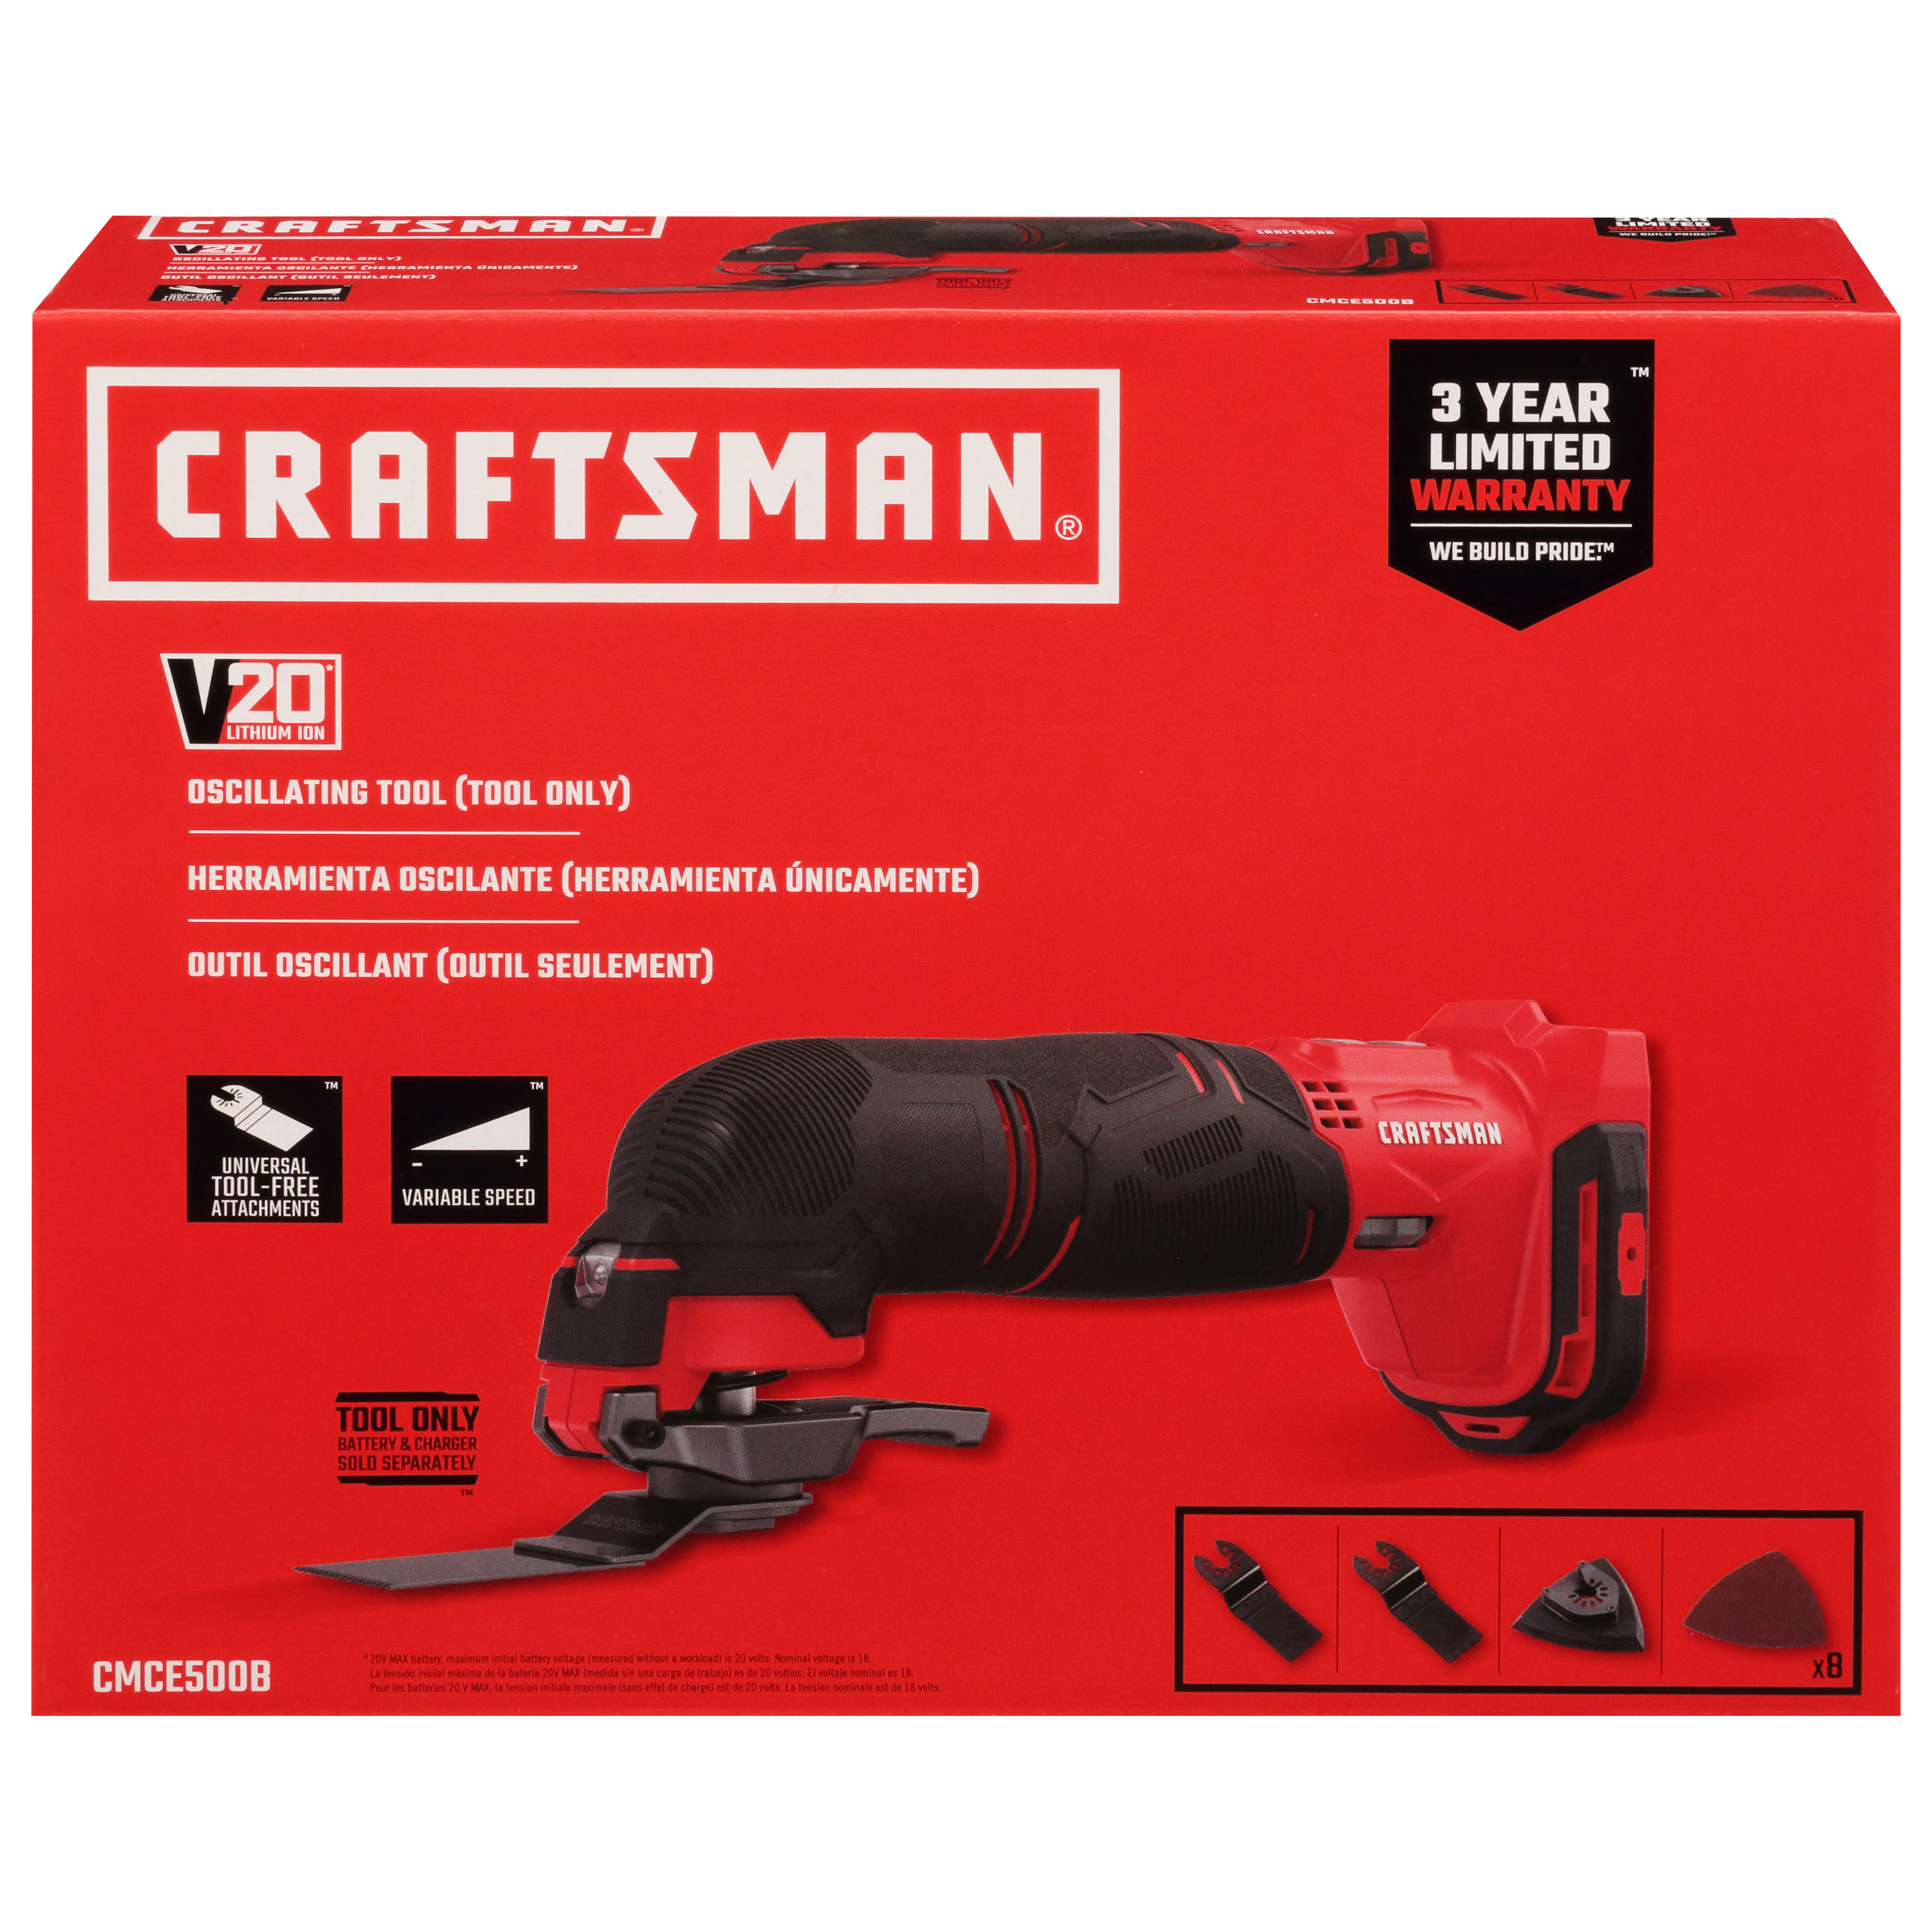 Craftsman 20V MAX 20 volt Cordless Oscillating Tool 18000 opm Red pc.  Case Of: 1; Each Pack Qty: